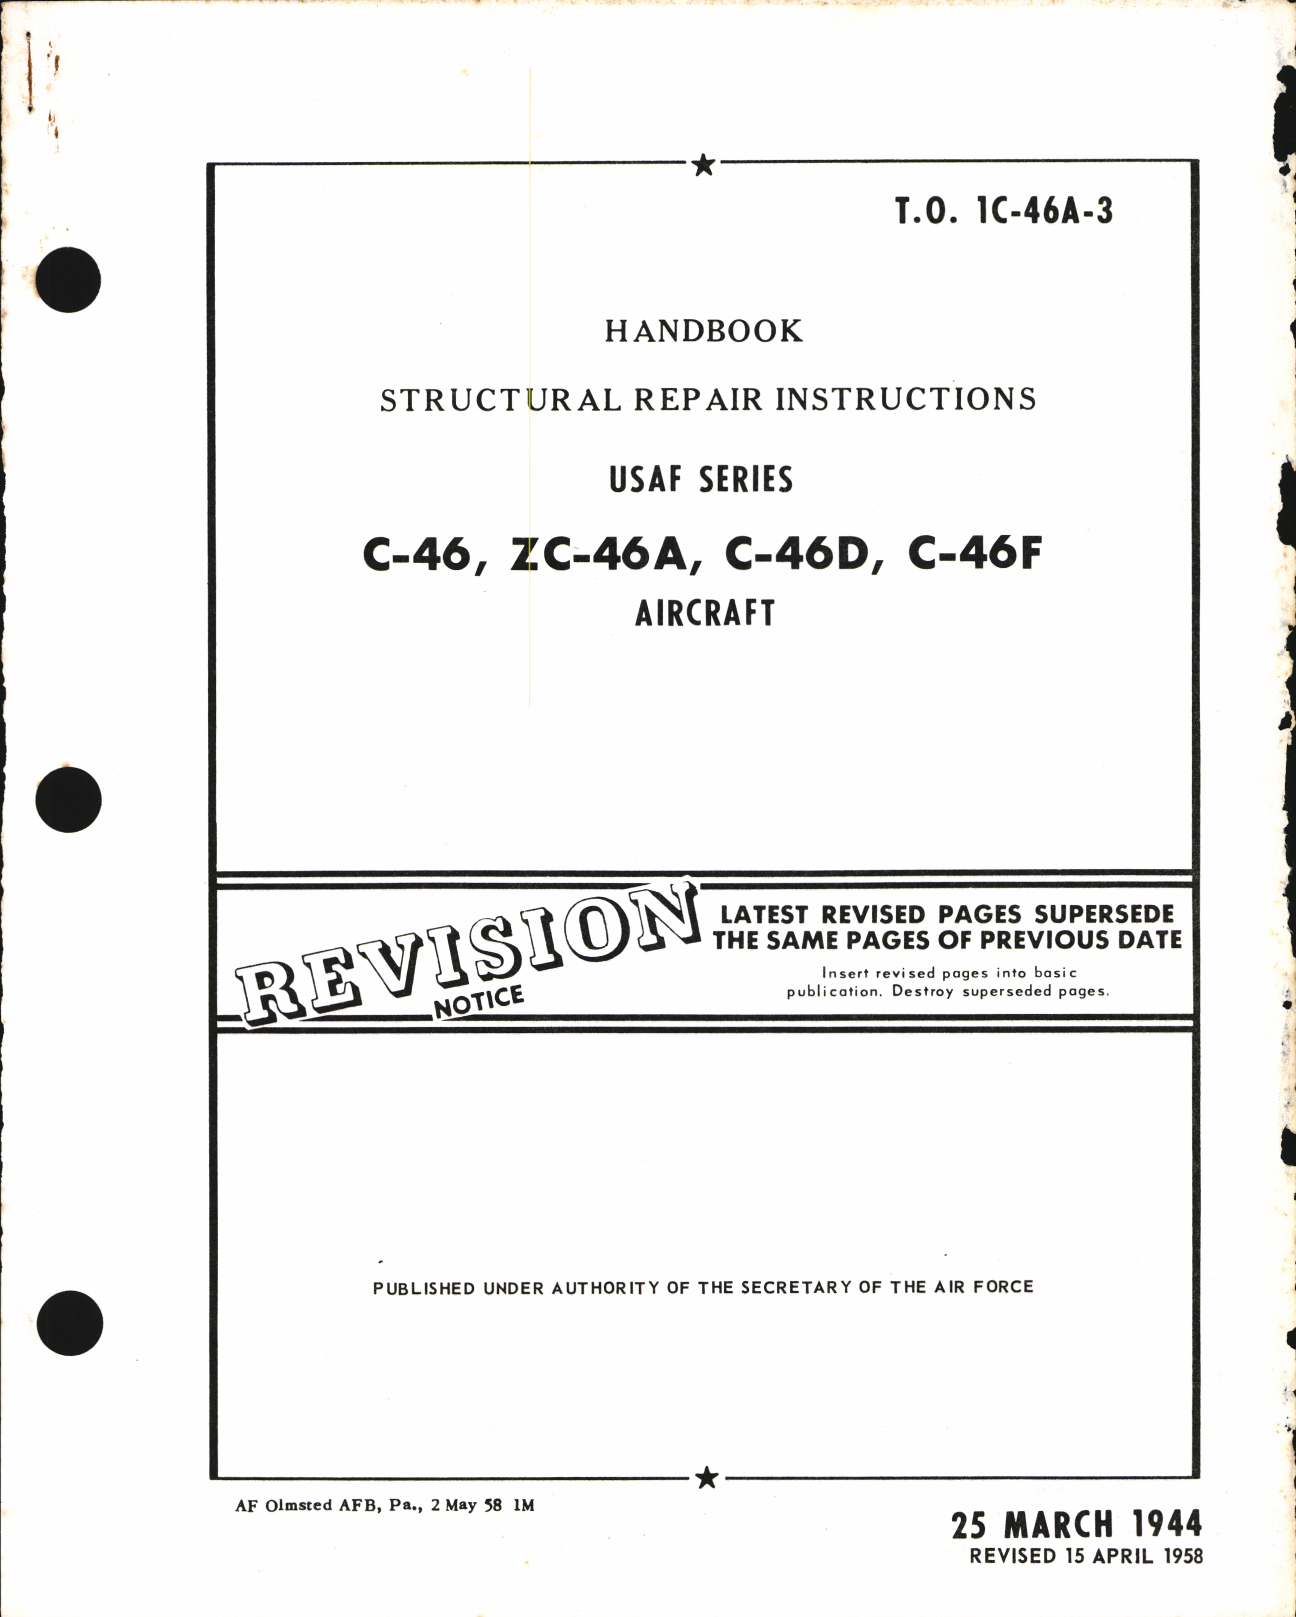 Sample page 1 from AirCorps Library document: Structural Repair Instructions for C-46, ZC-46A, C-46D, and C-46F